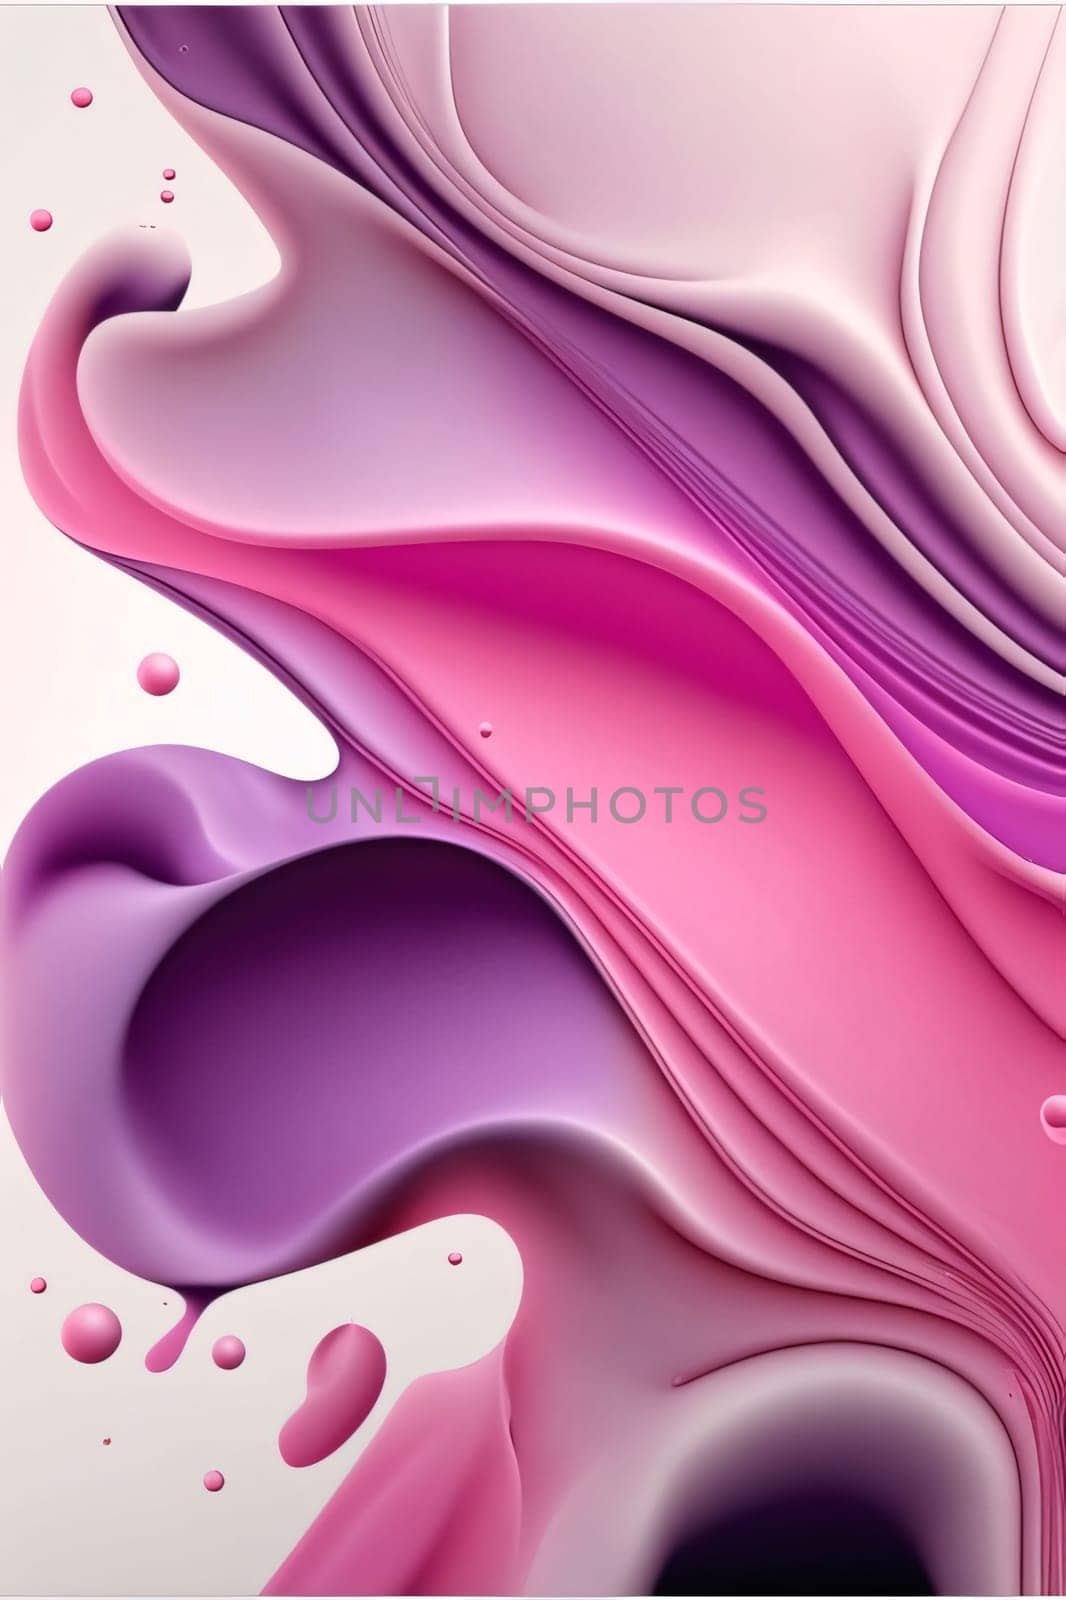 Abstract background with pink and purple flowing liquid shapes. Vector illustration. by ThemesS